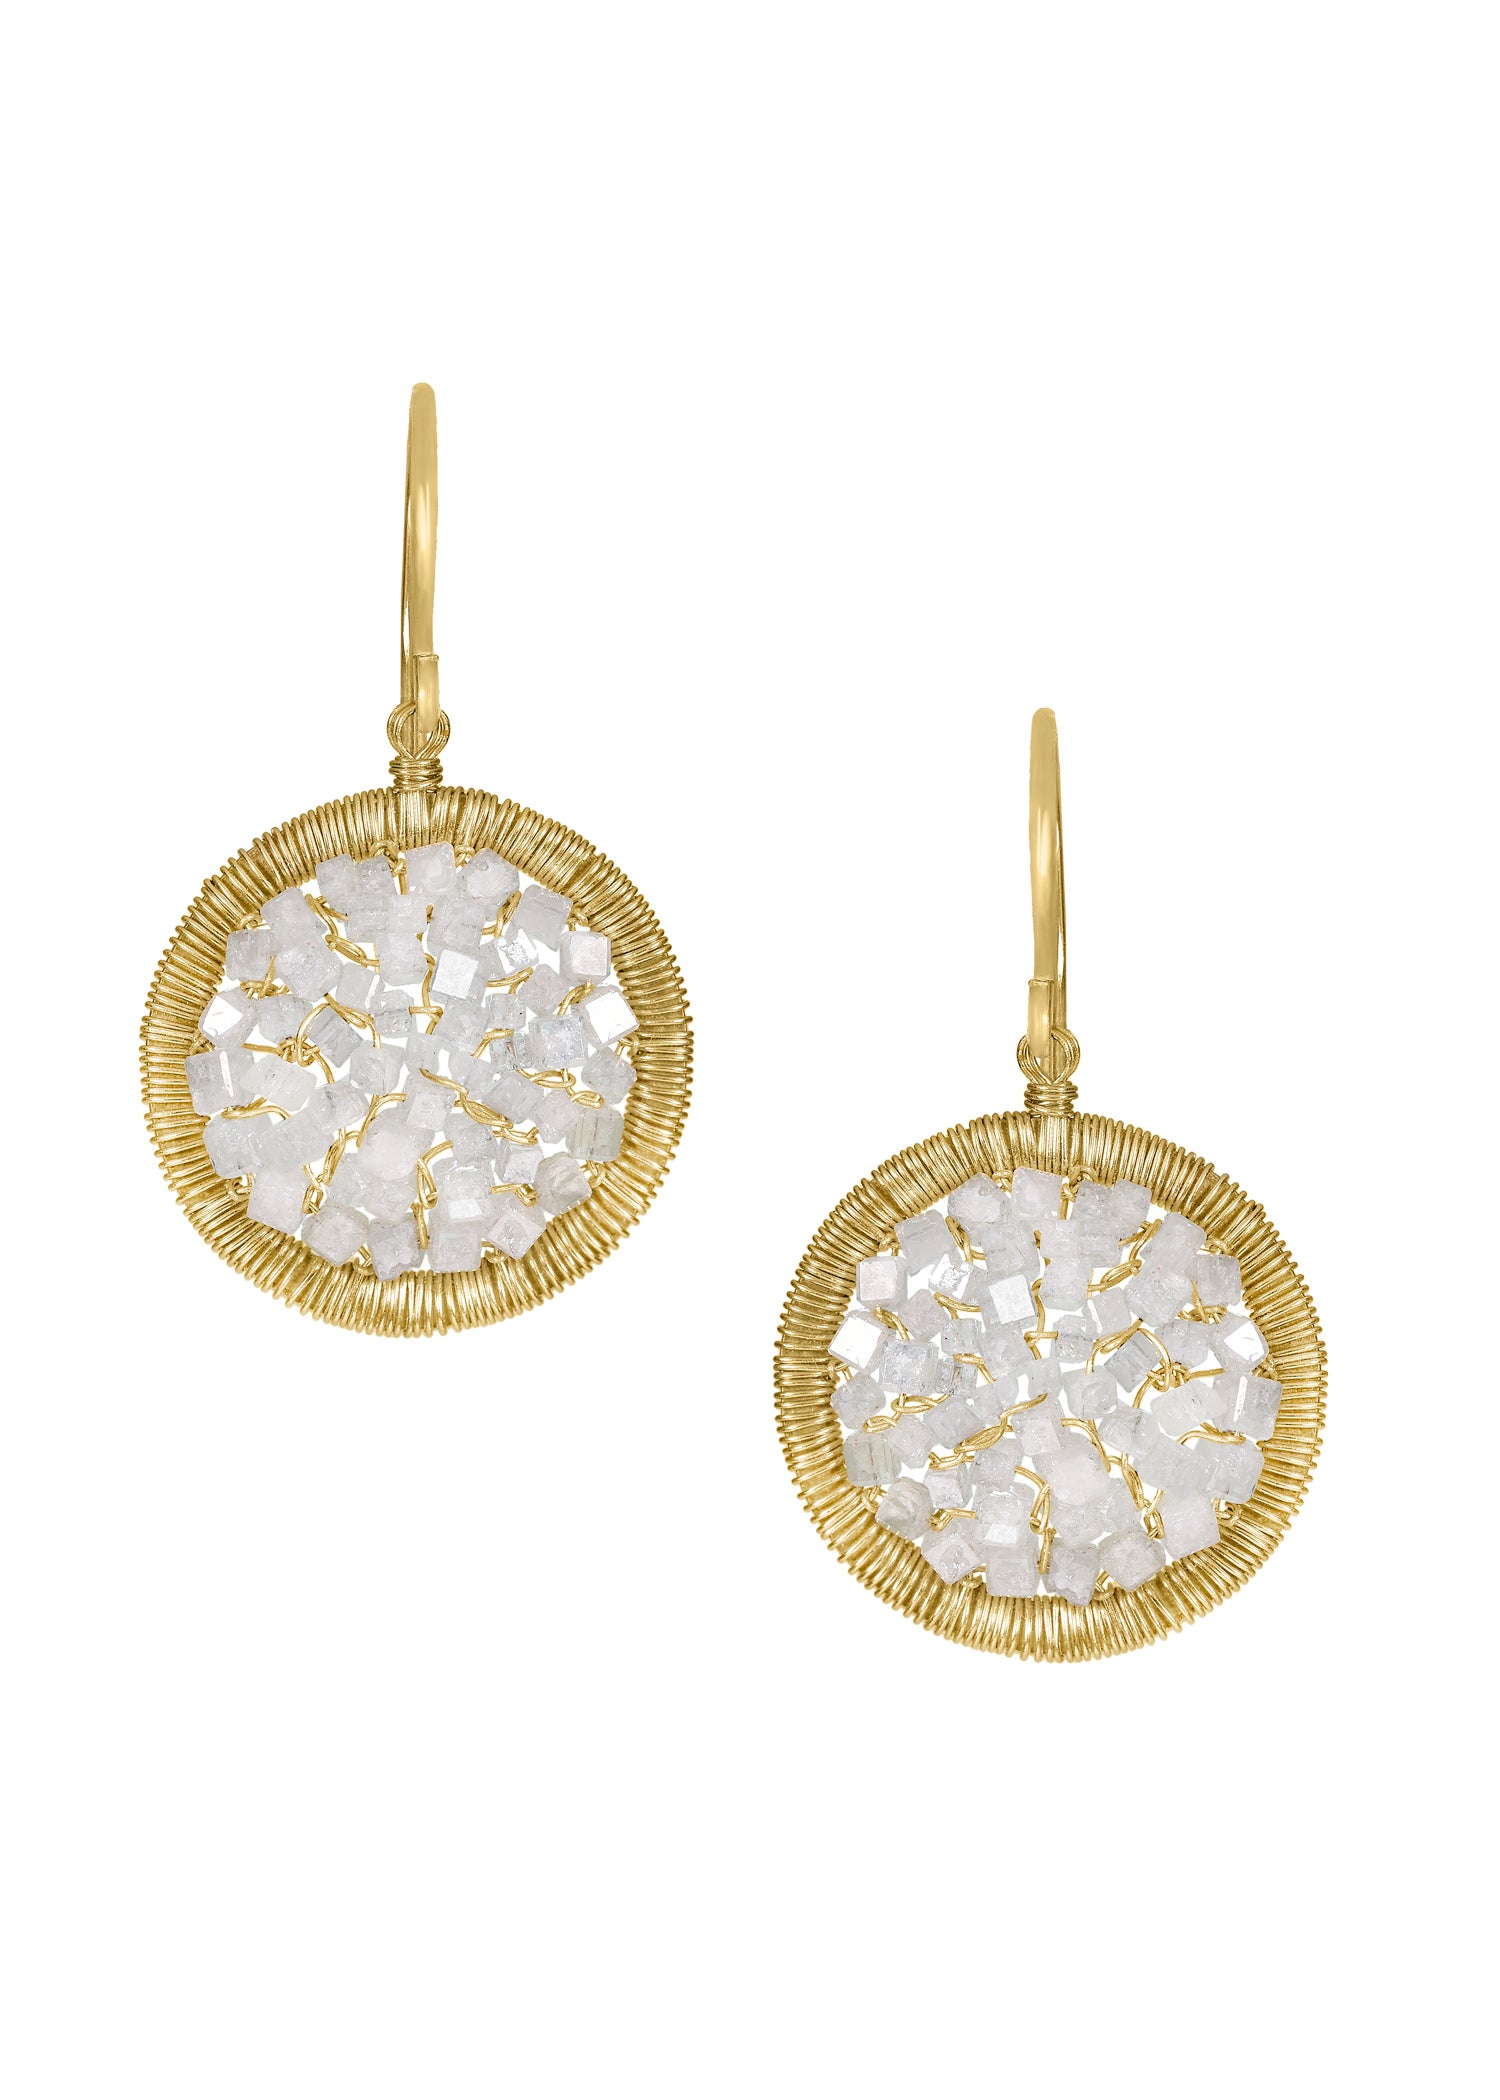 Diamond 14k gold Earrings measure 1-1/8" in length (including the ear wires) and 9/16" in width Handmade in our Los Angeles studio